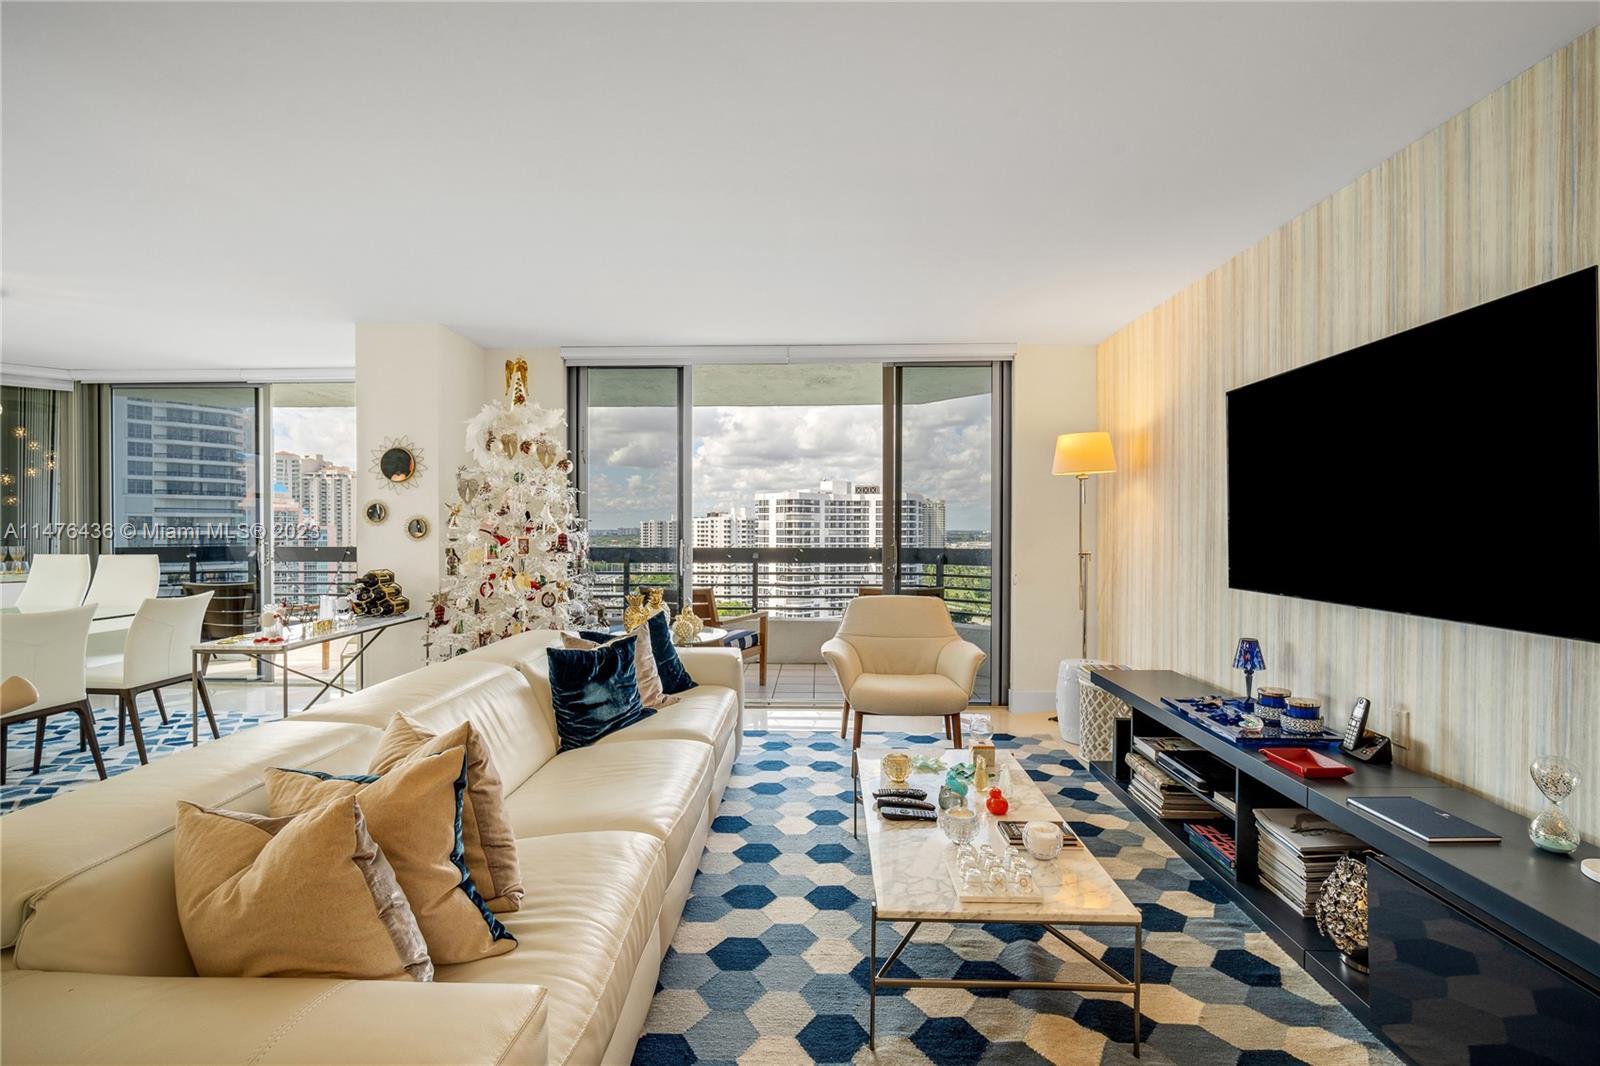 Mystic Pointe - Tower 400 / Aventura / 3 Beds, 3 Baths / 1,714 sq. ft. of living area / Fully remode